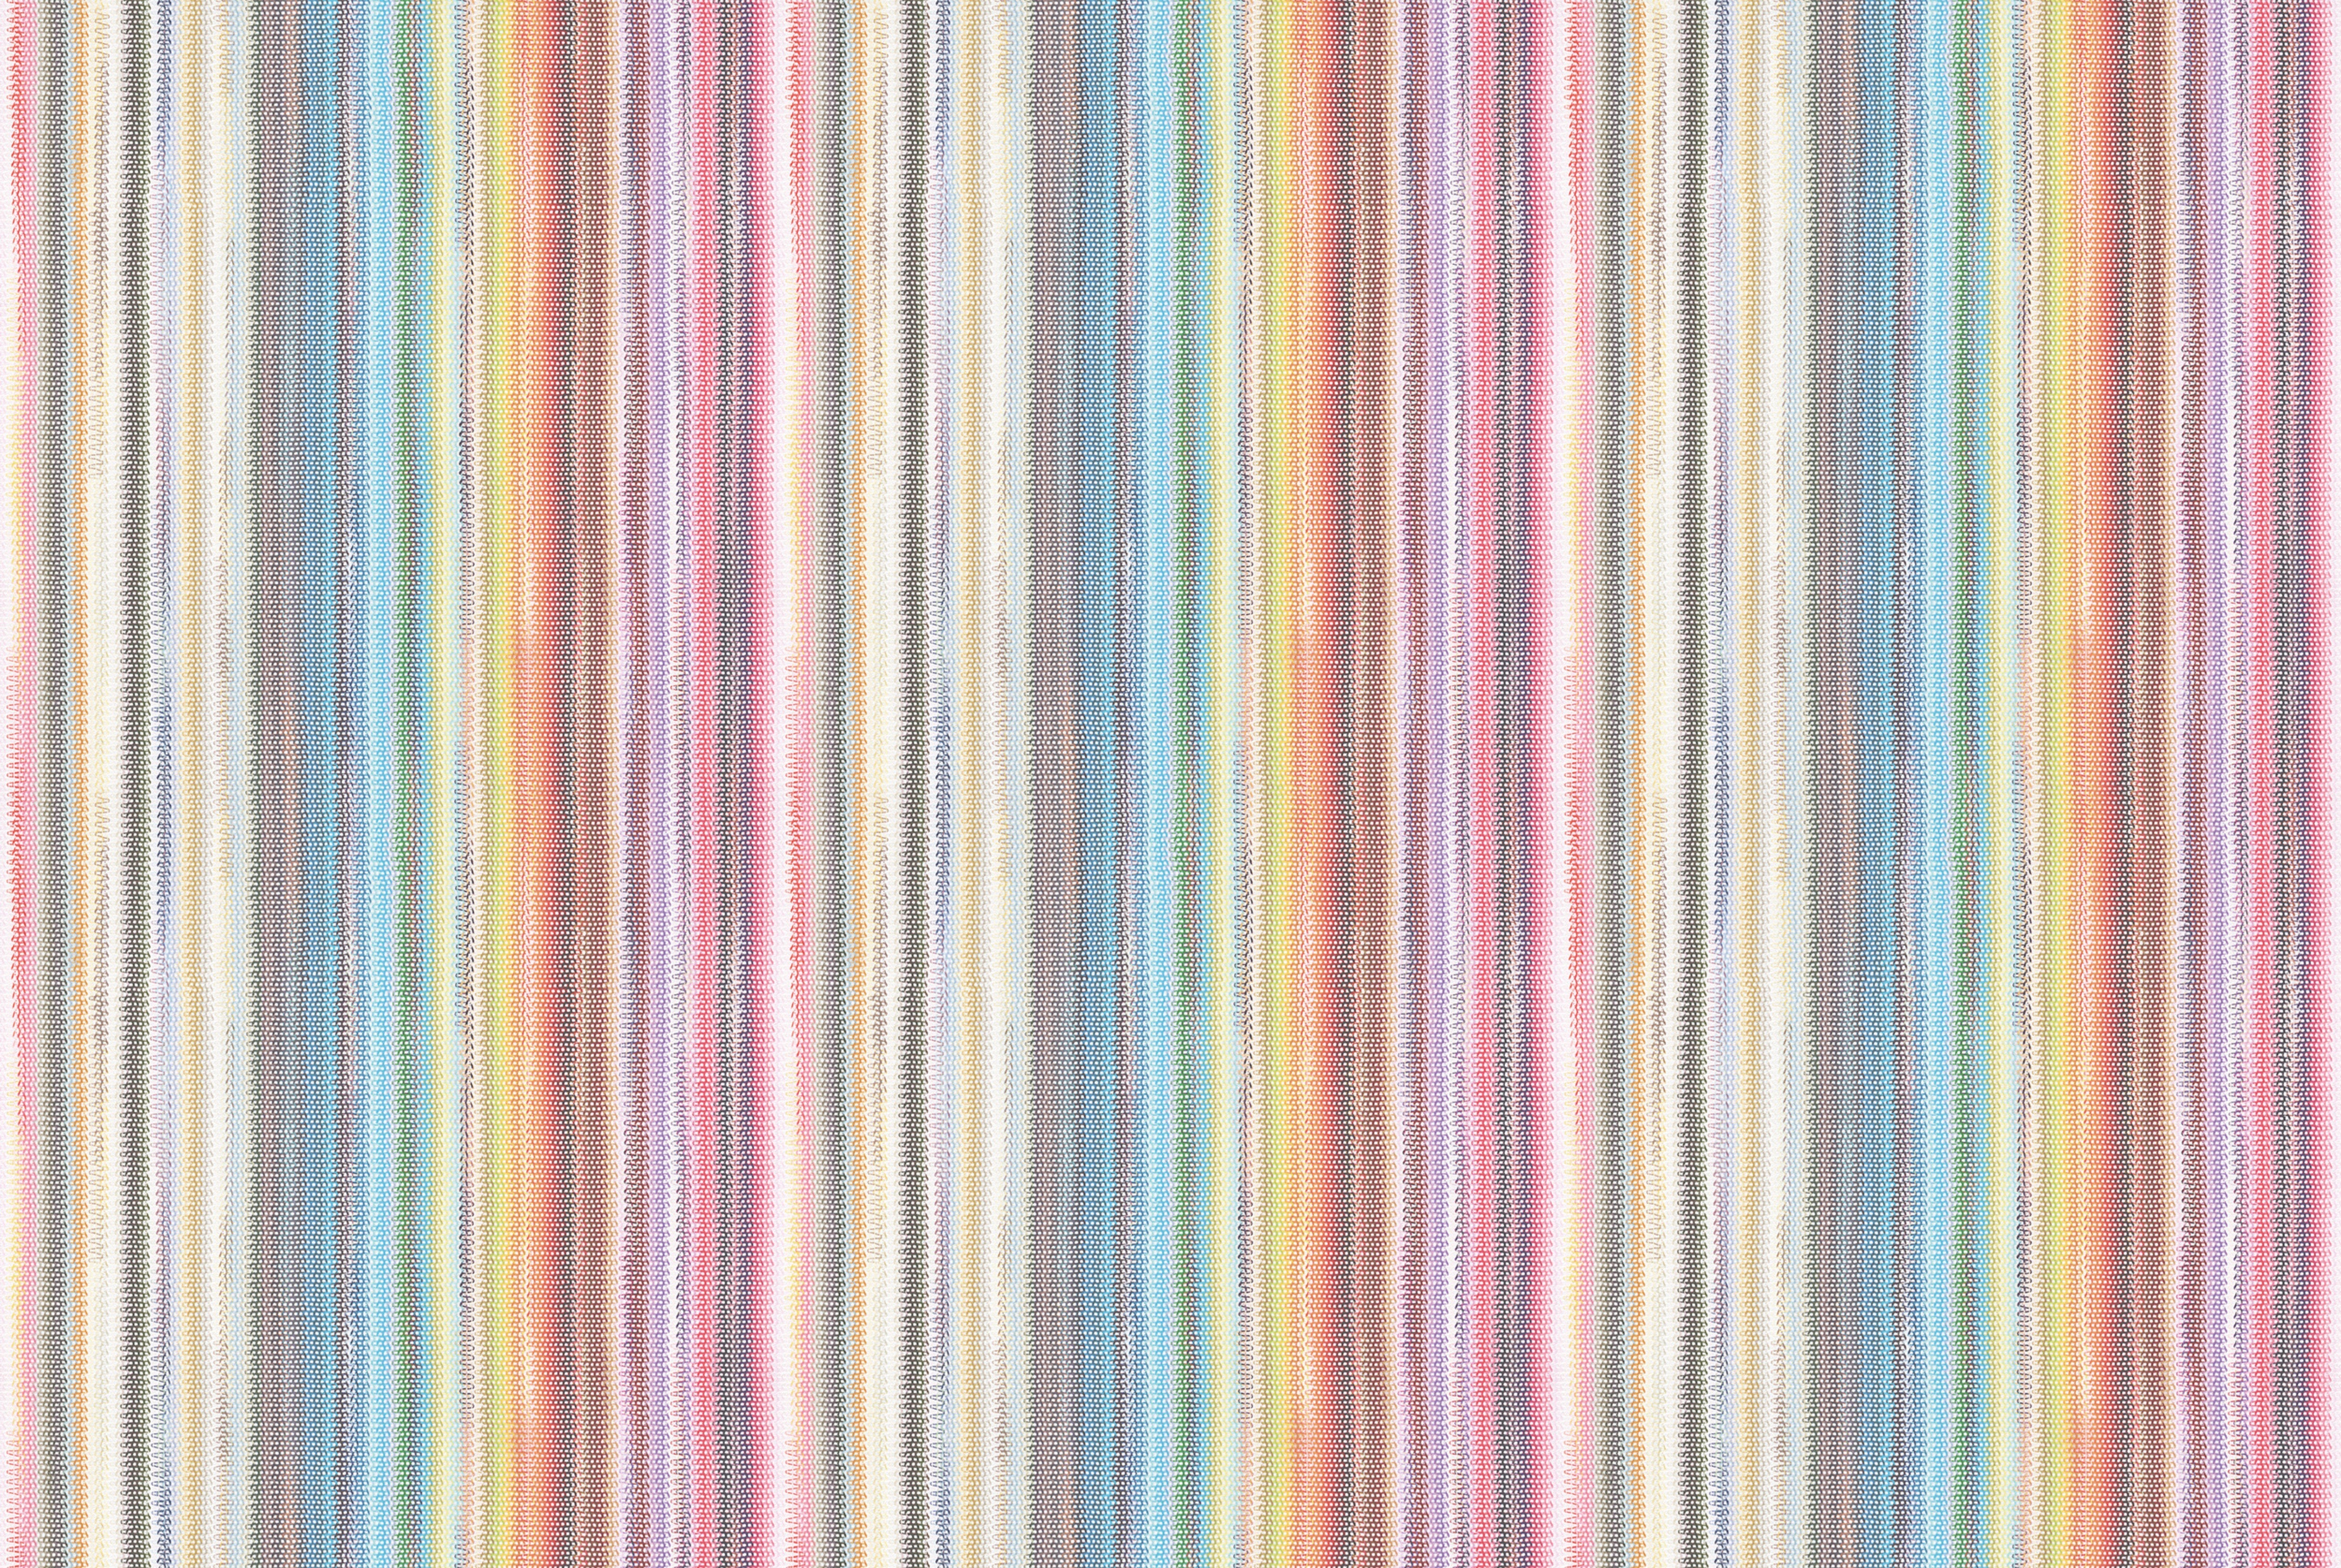 Missoni Home Wallcoverings 04 Striped Sunset 10396